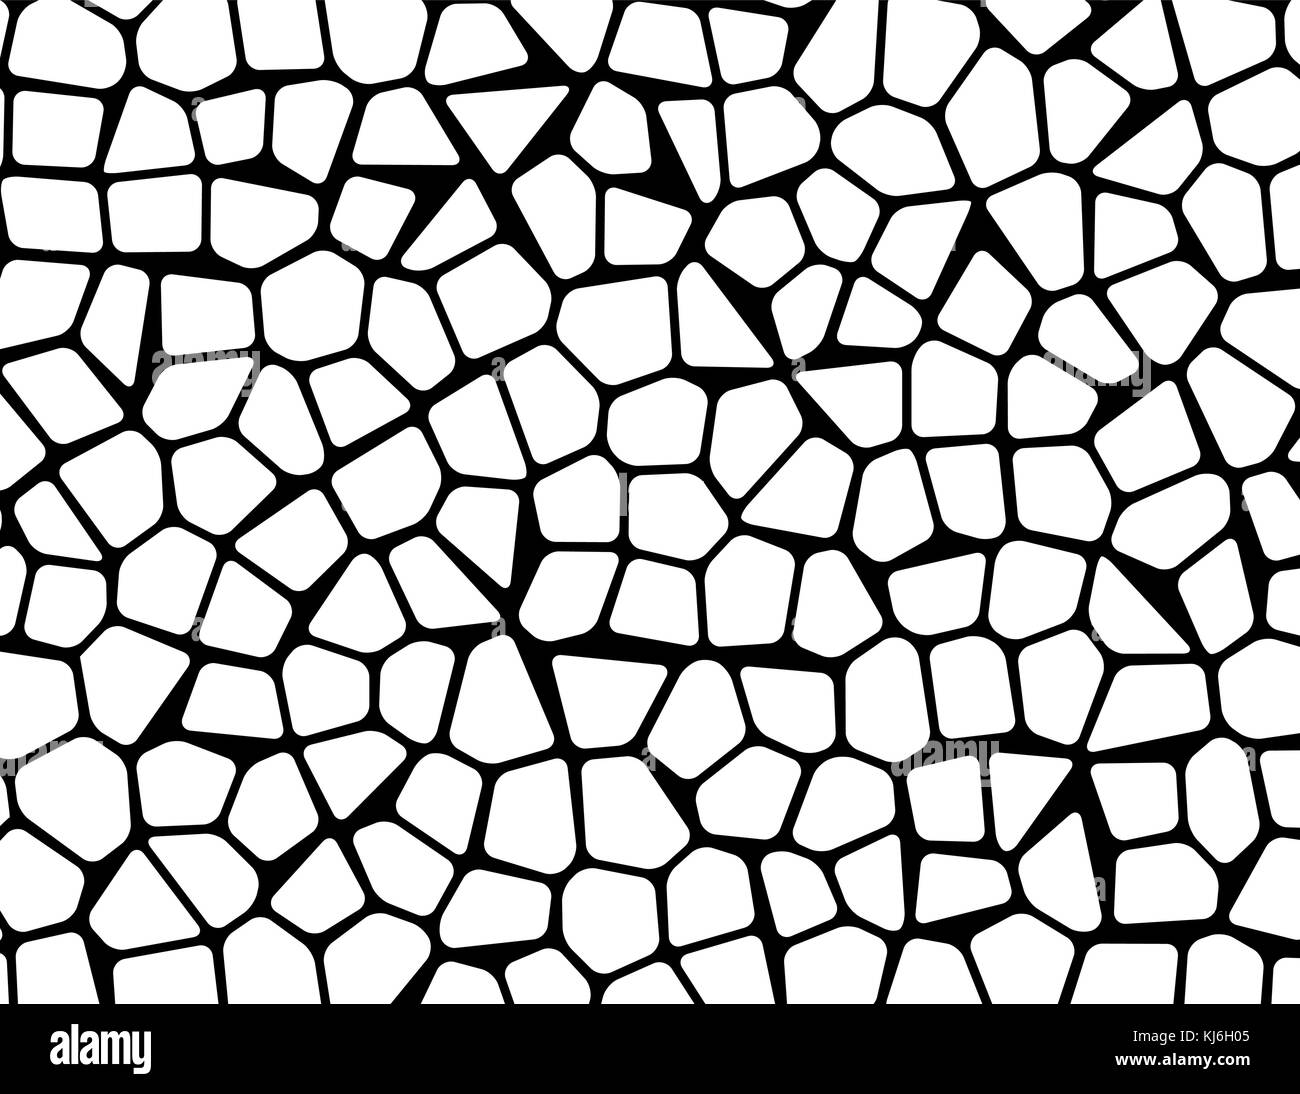 stone pebble texture silhouette mosaic vector background wallpaper Stock Vector